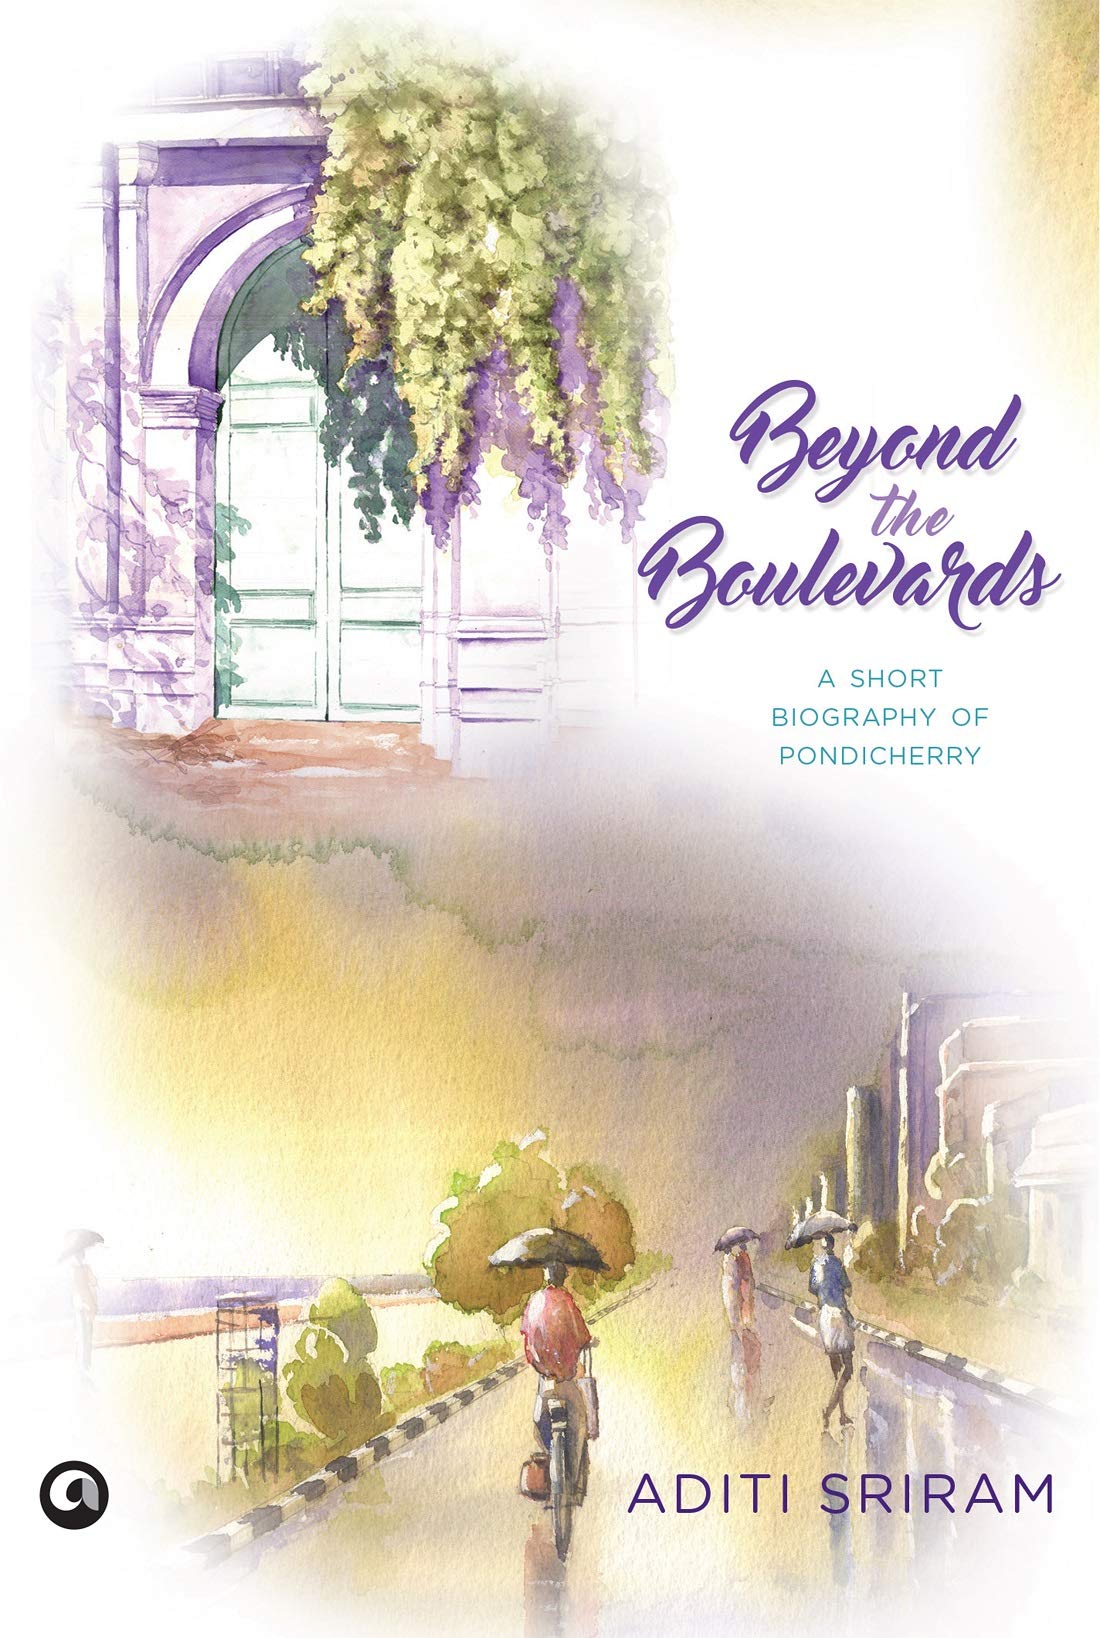 BEYOND THE BOULEVARDS - A SHORT BIOGRAPHY OF PONDICHERRY